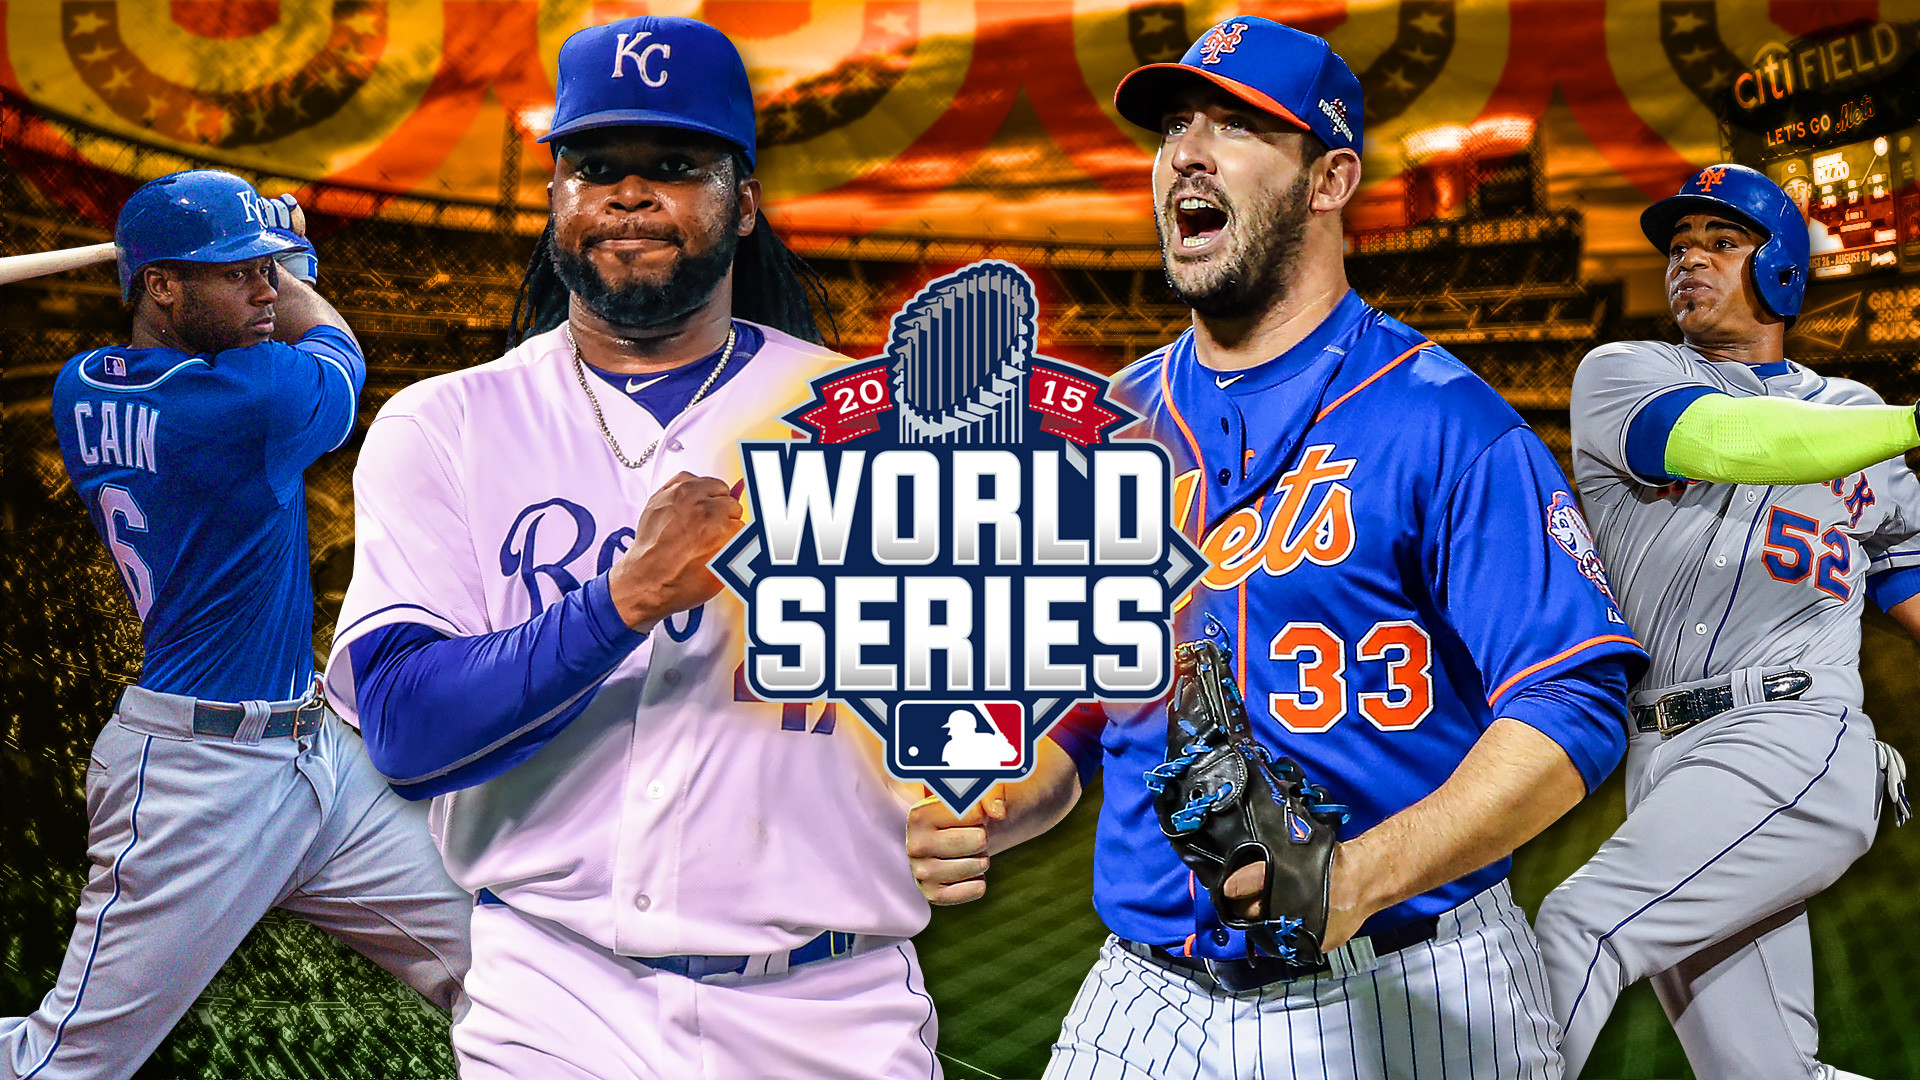 1920x1080 World Series 2015: Royals-Mets TV schedule, players to watch, stats | MLB |  Sporting News